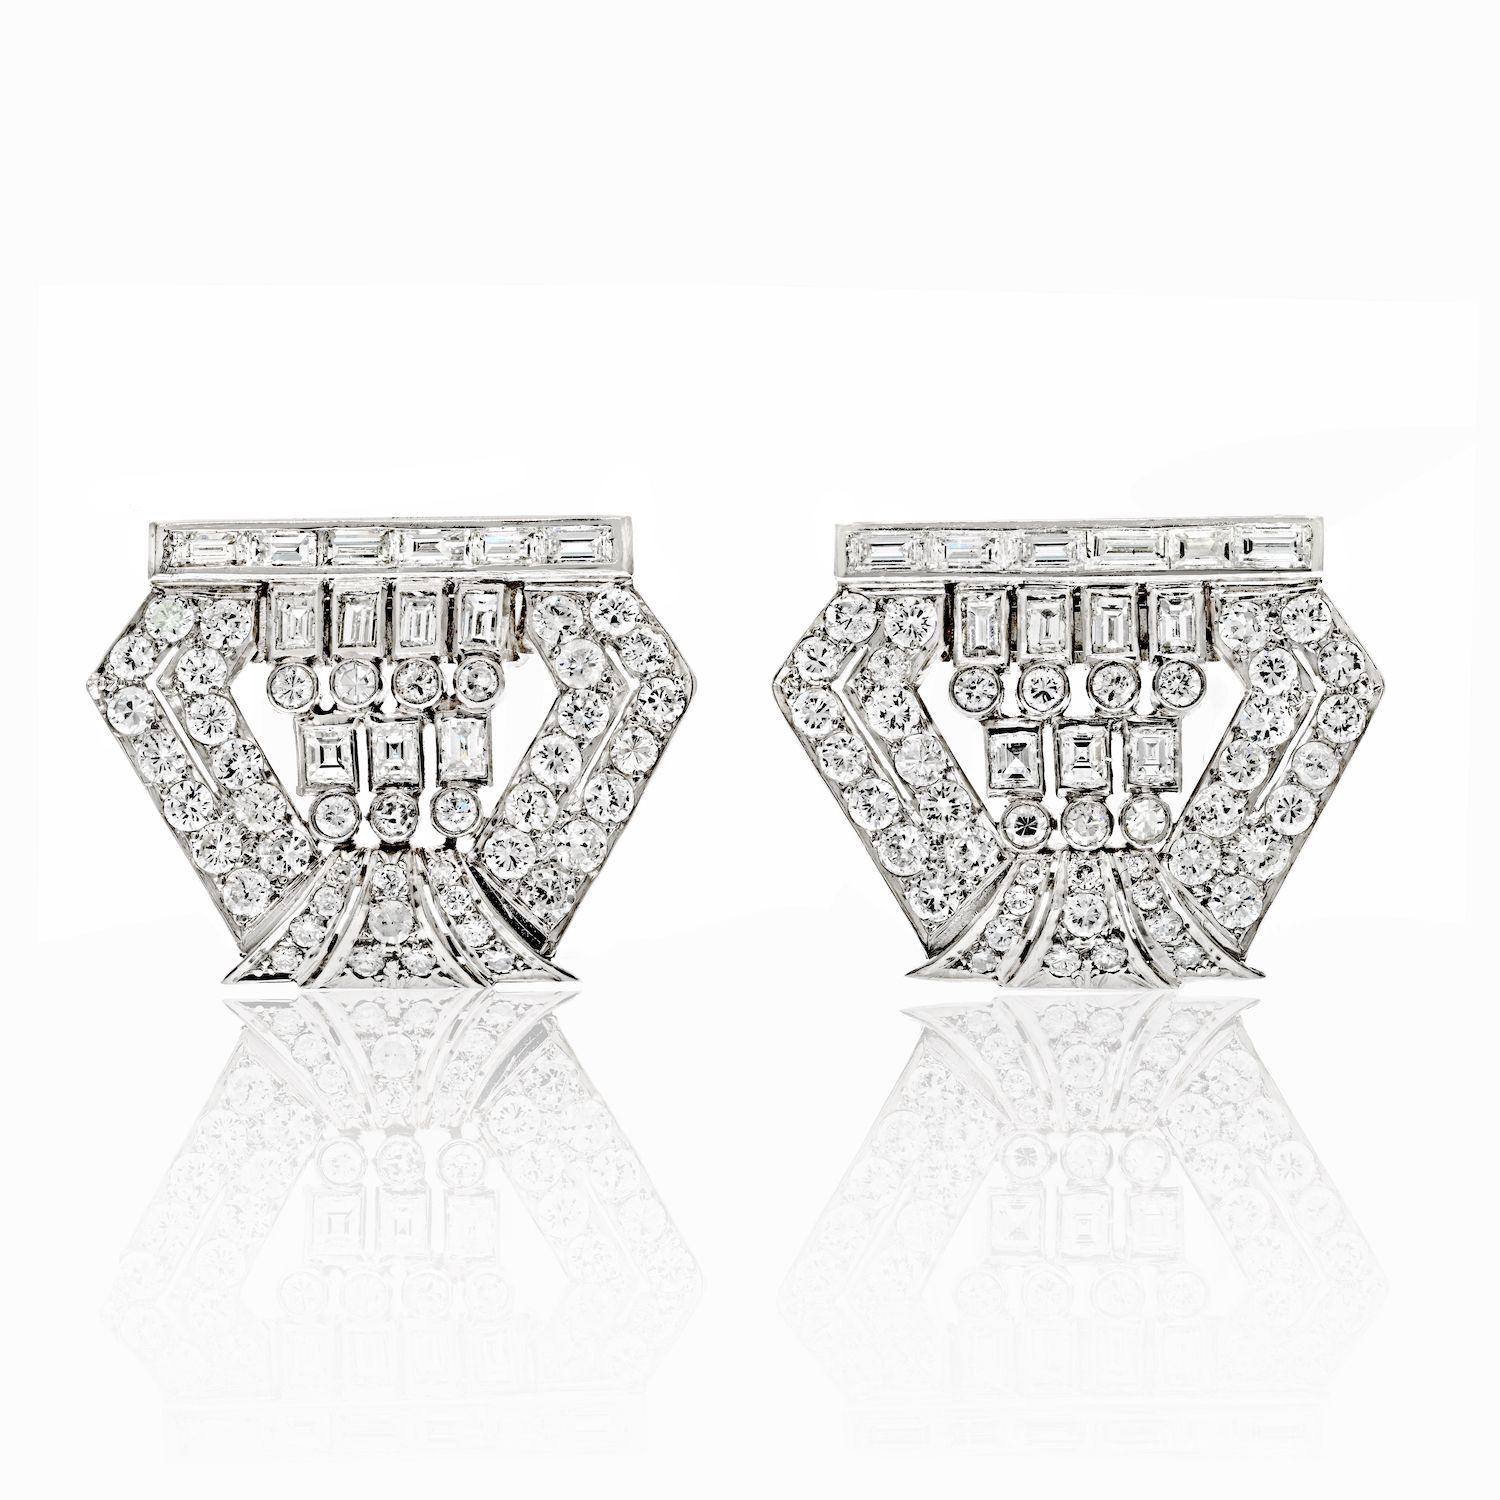 Double clip diamond brooches from the 1940s are a timeless and elegant accessory that can add a touch of glamour to any outfit. Here are a few tips on how to wear them:
Placement: 
Double clip diamond brooches can be worn in many different ways, but